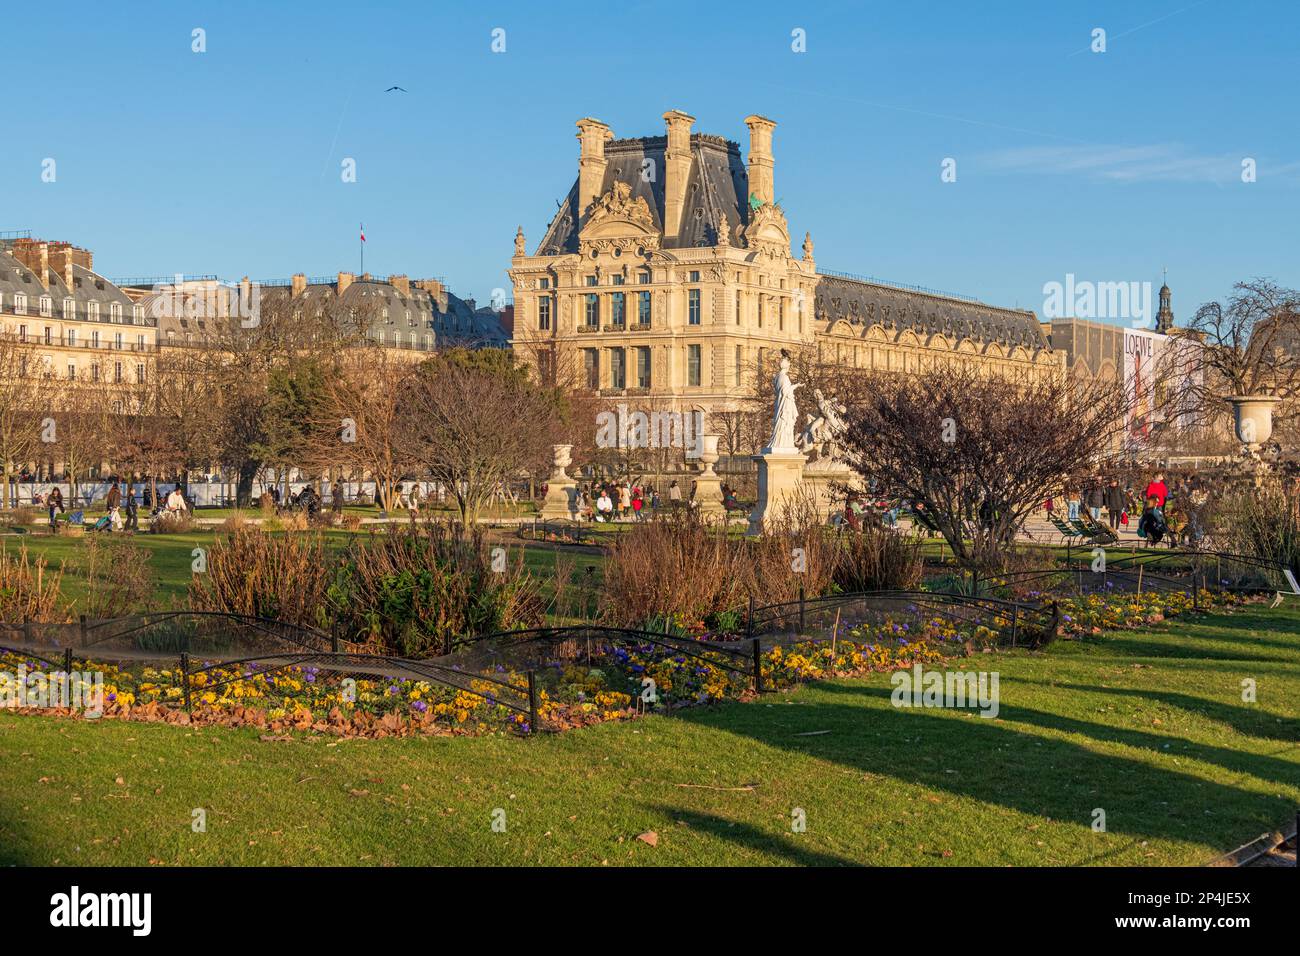 A view of the Louvre Museum from the Tuileries Garden in Paris. Stock Photo